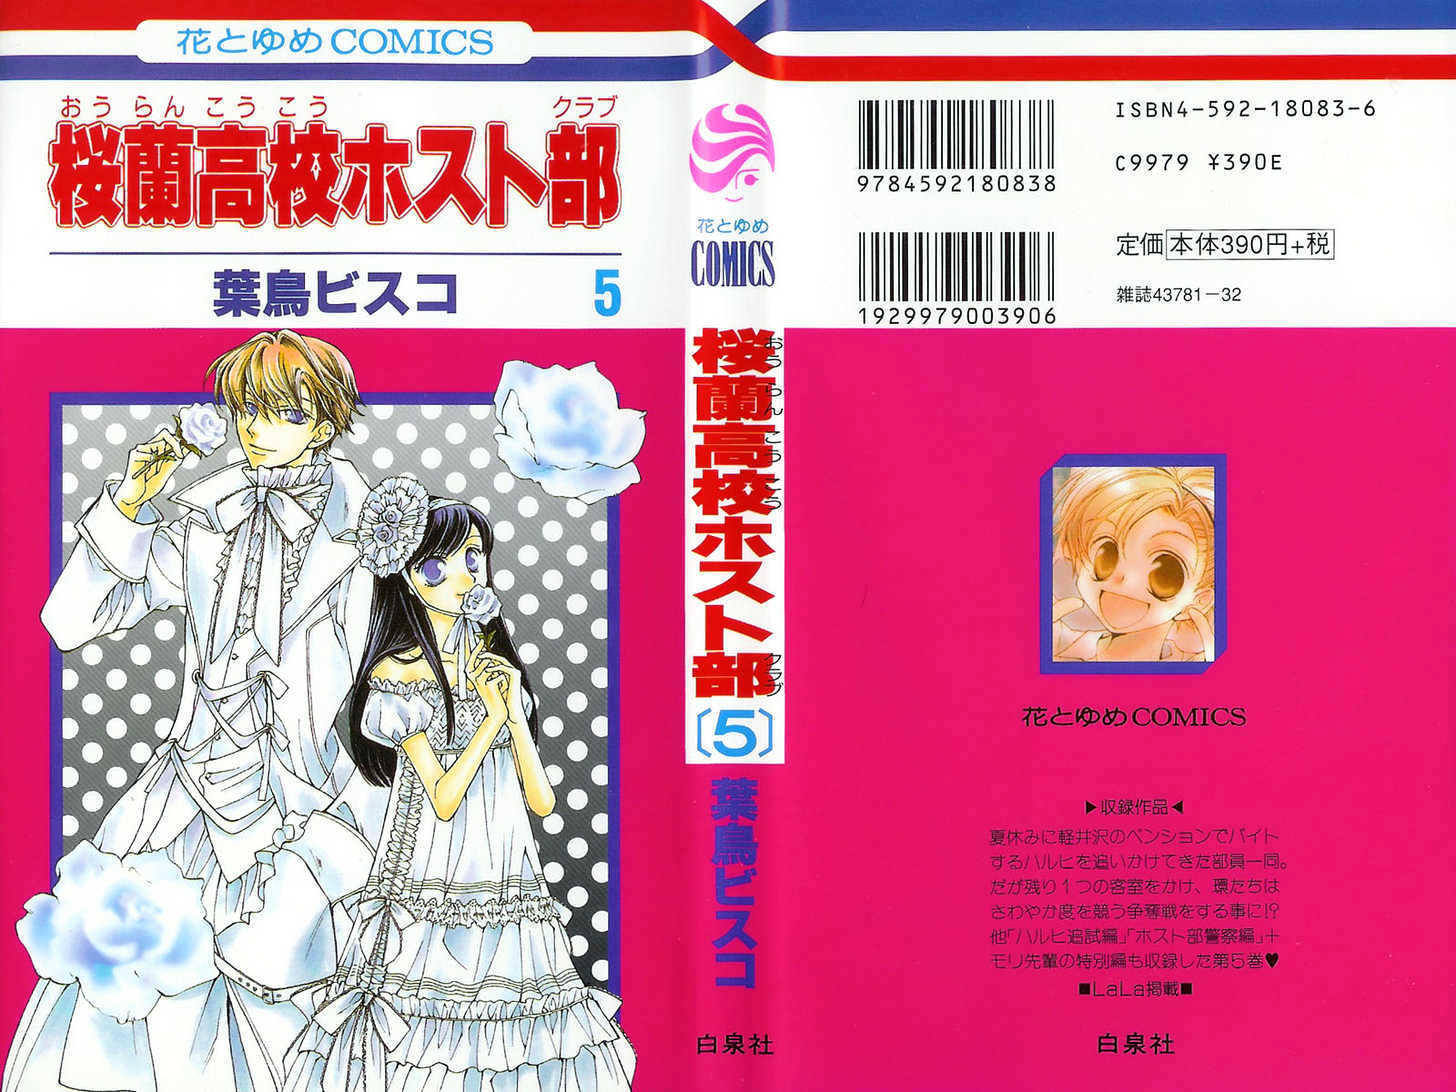 Ouran High School Host Club Chapter 17 Read Ouran High School Host Club Chapter 17 Online At Allmanga Us Page 2